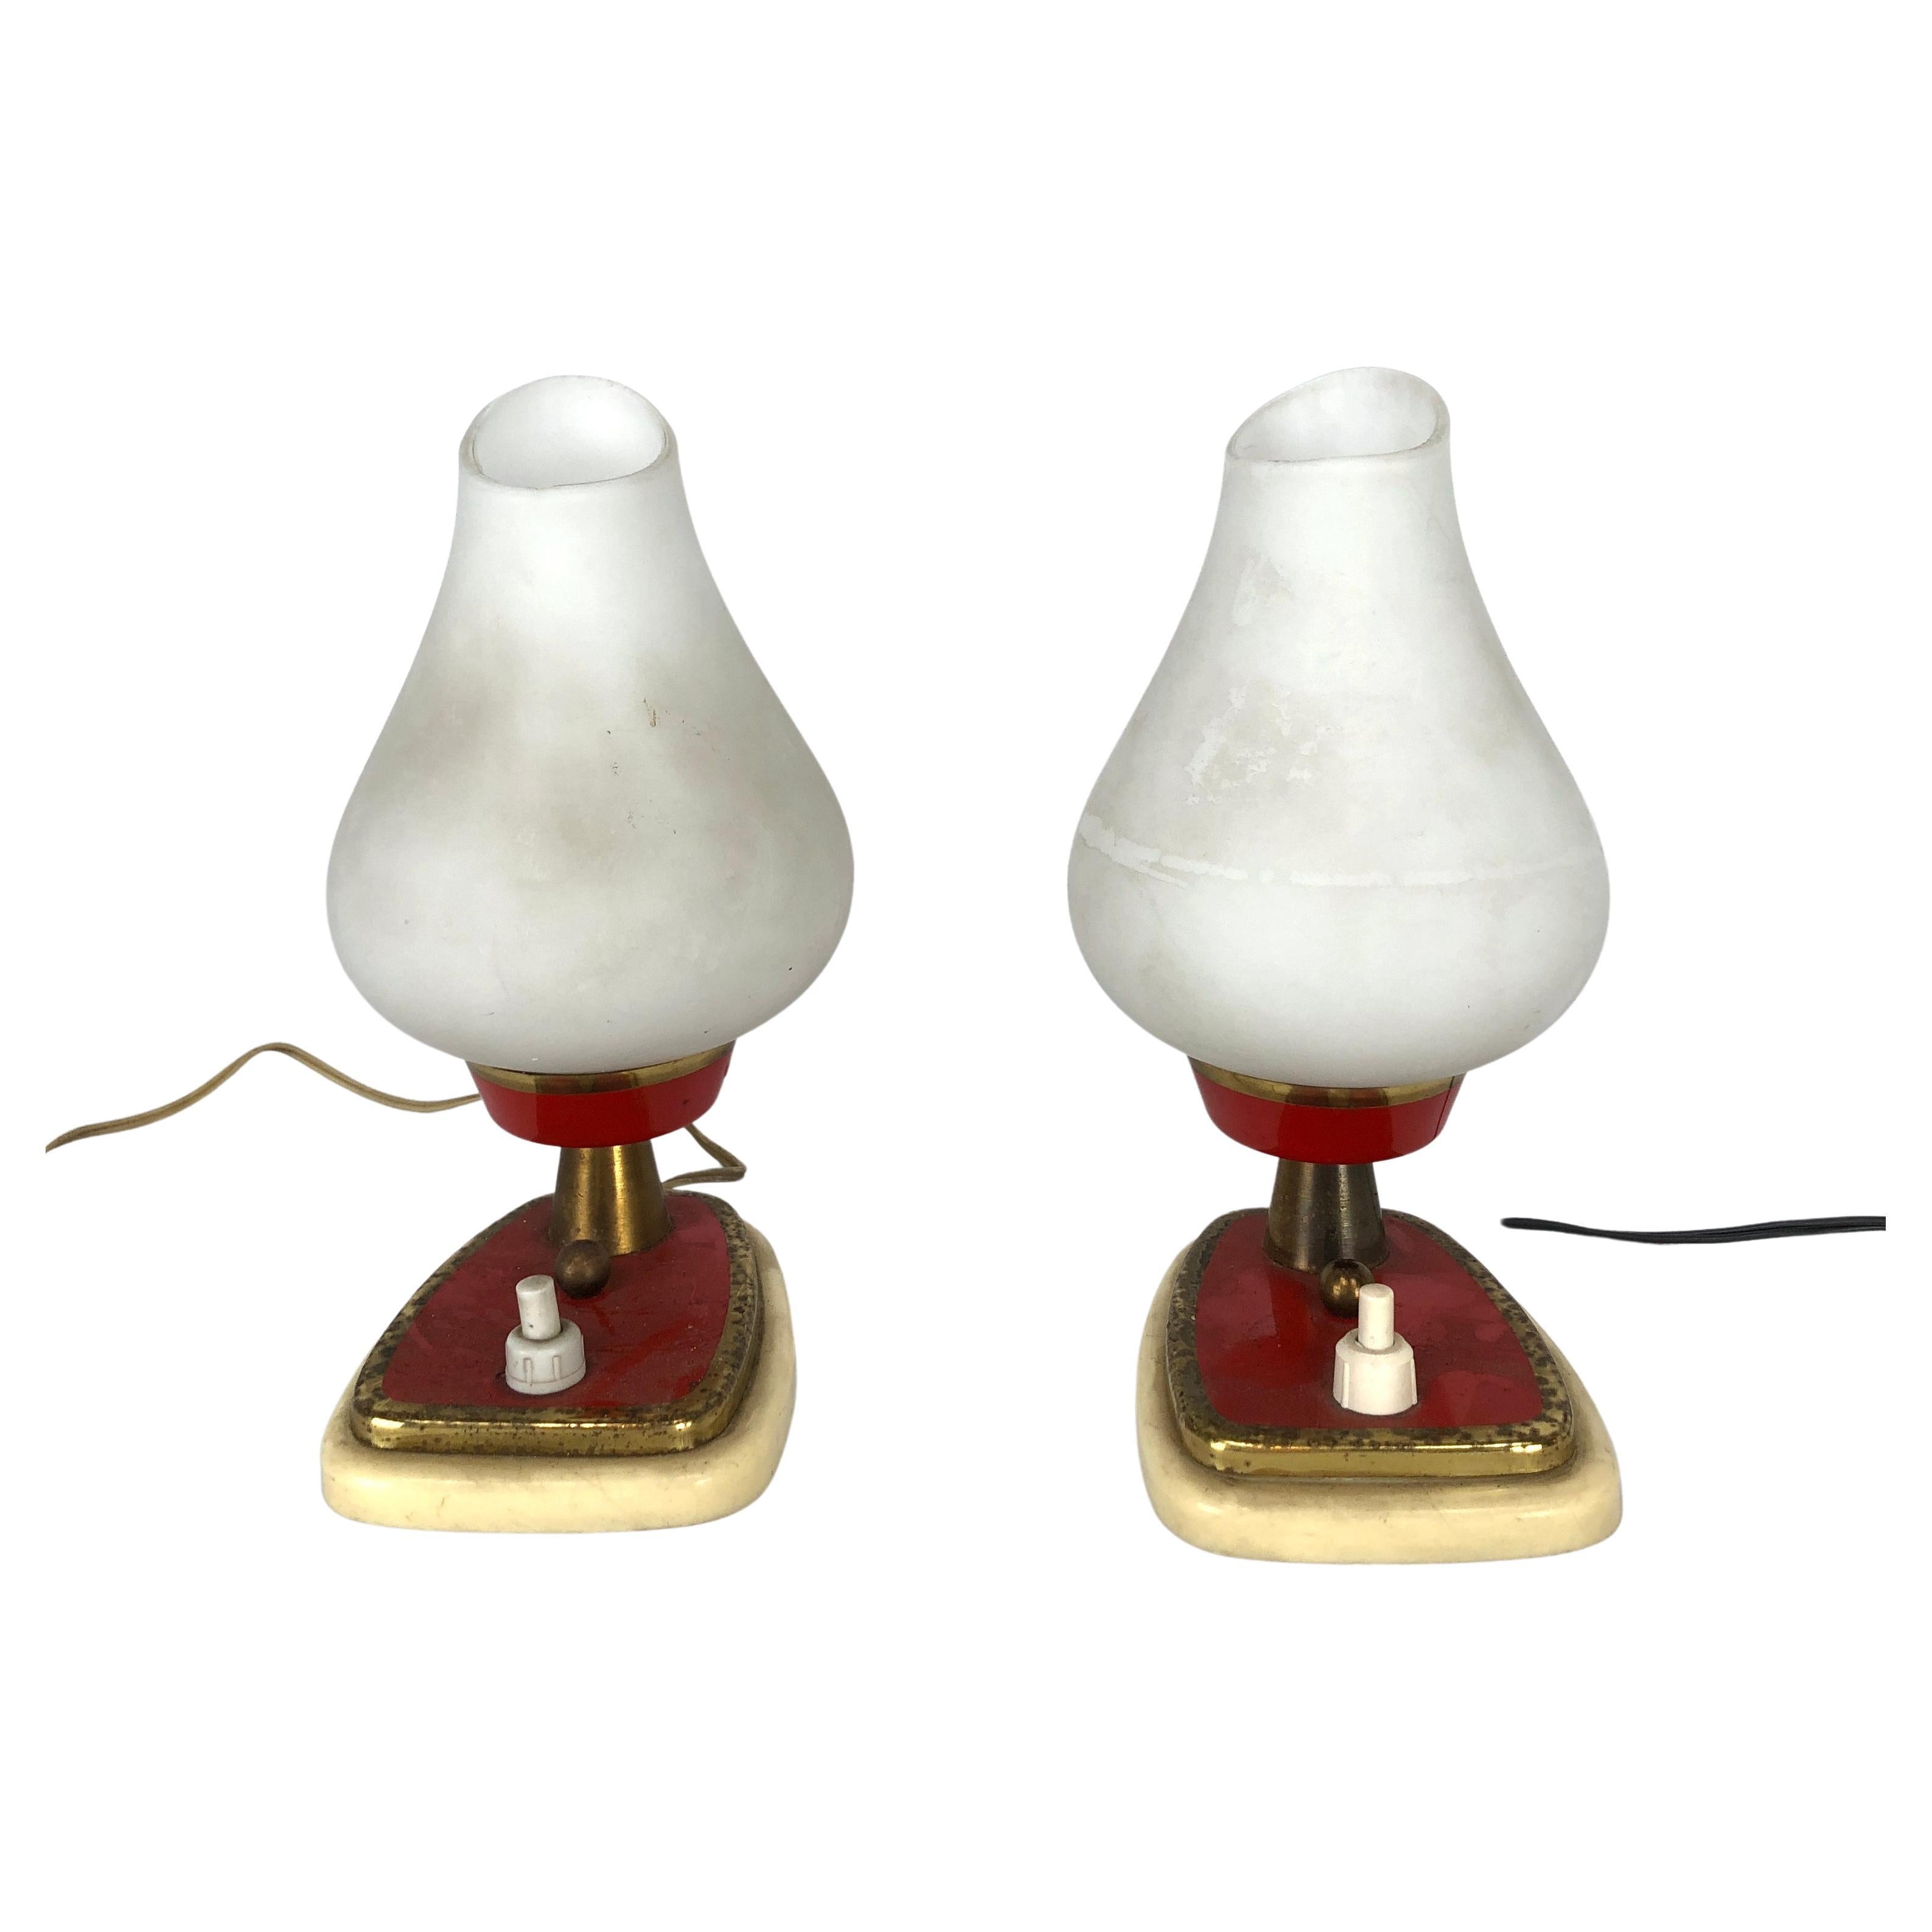 Pair of Midcentury Italian Table Lamps or Sconces